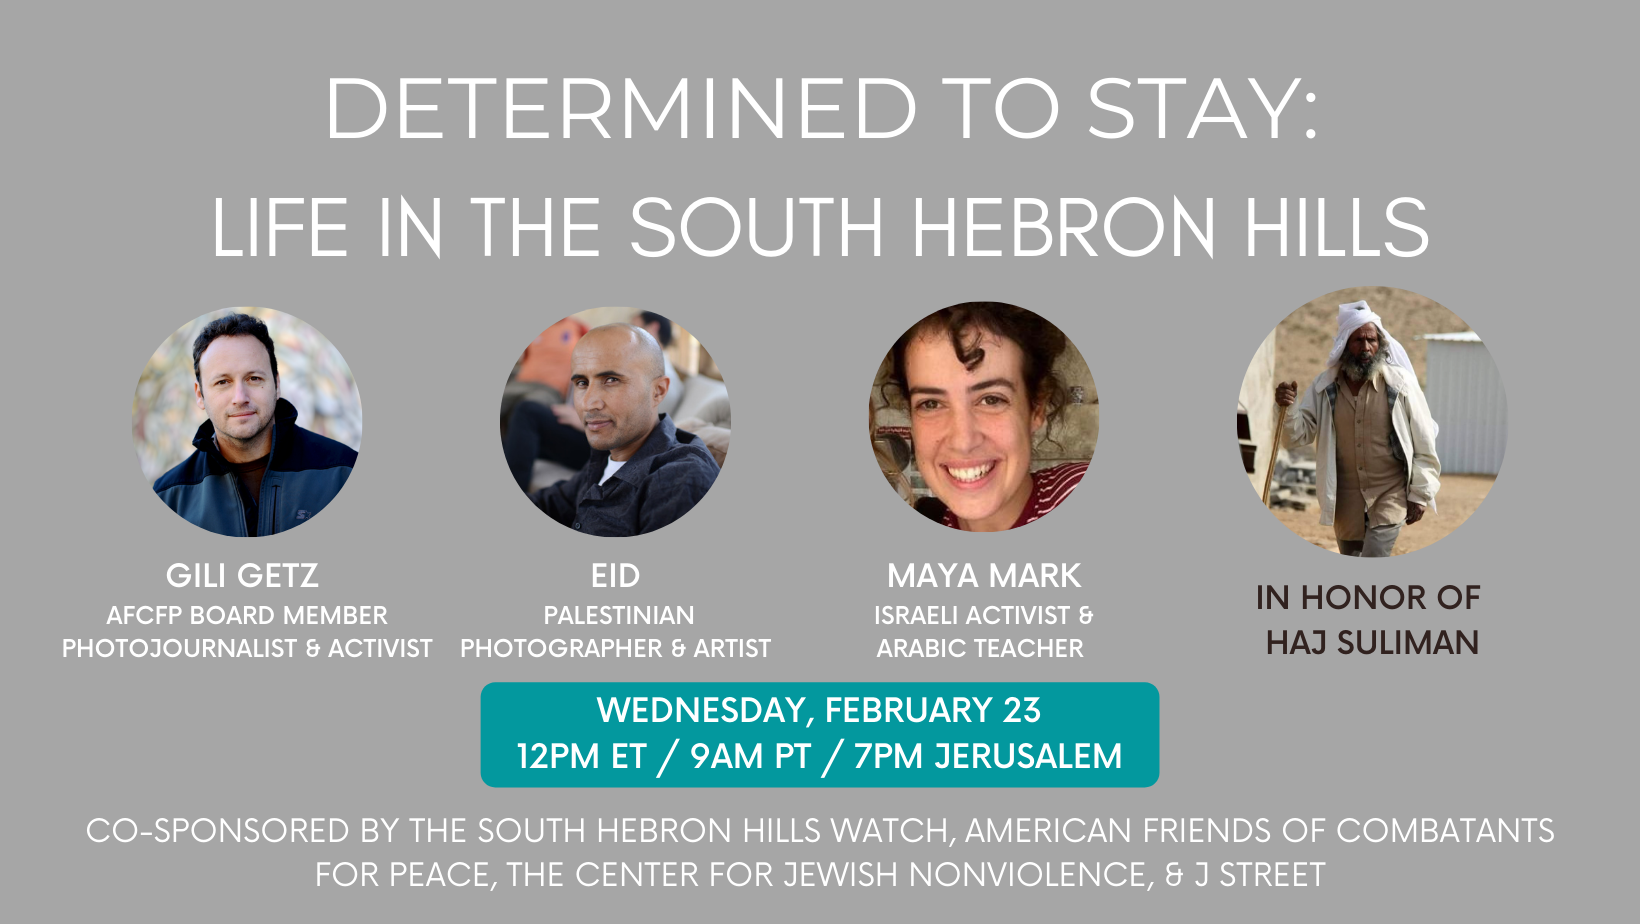 Determined to Stay: Life in the South Hebron Hills (Flyer)